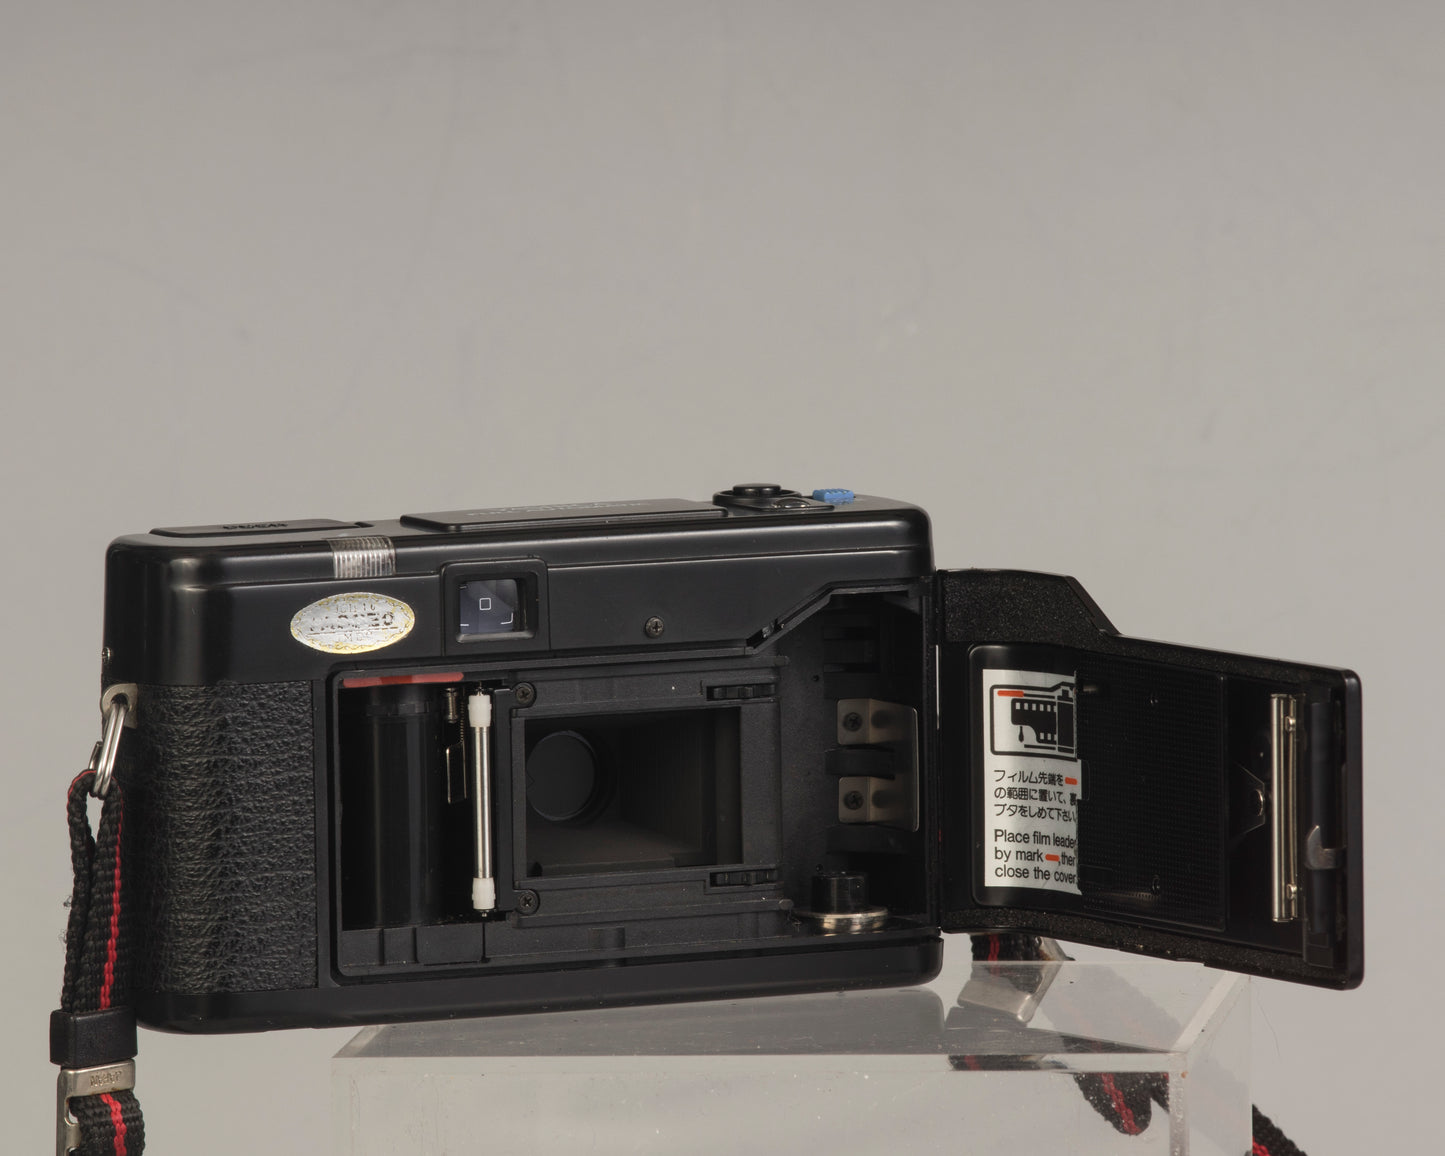 The Yashica Auto Focus Motor (shown with film door open) is a classic 35mm point-and-shoot film camera featuring a 38mm f2.8 lens